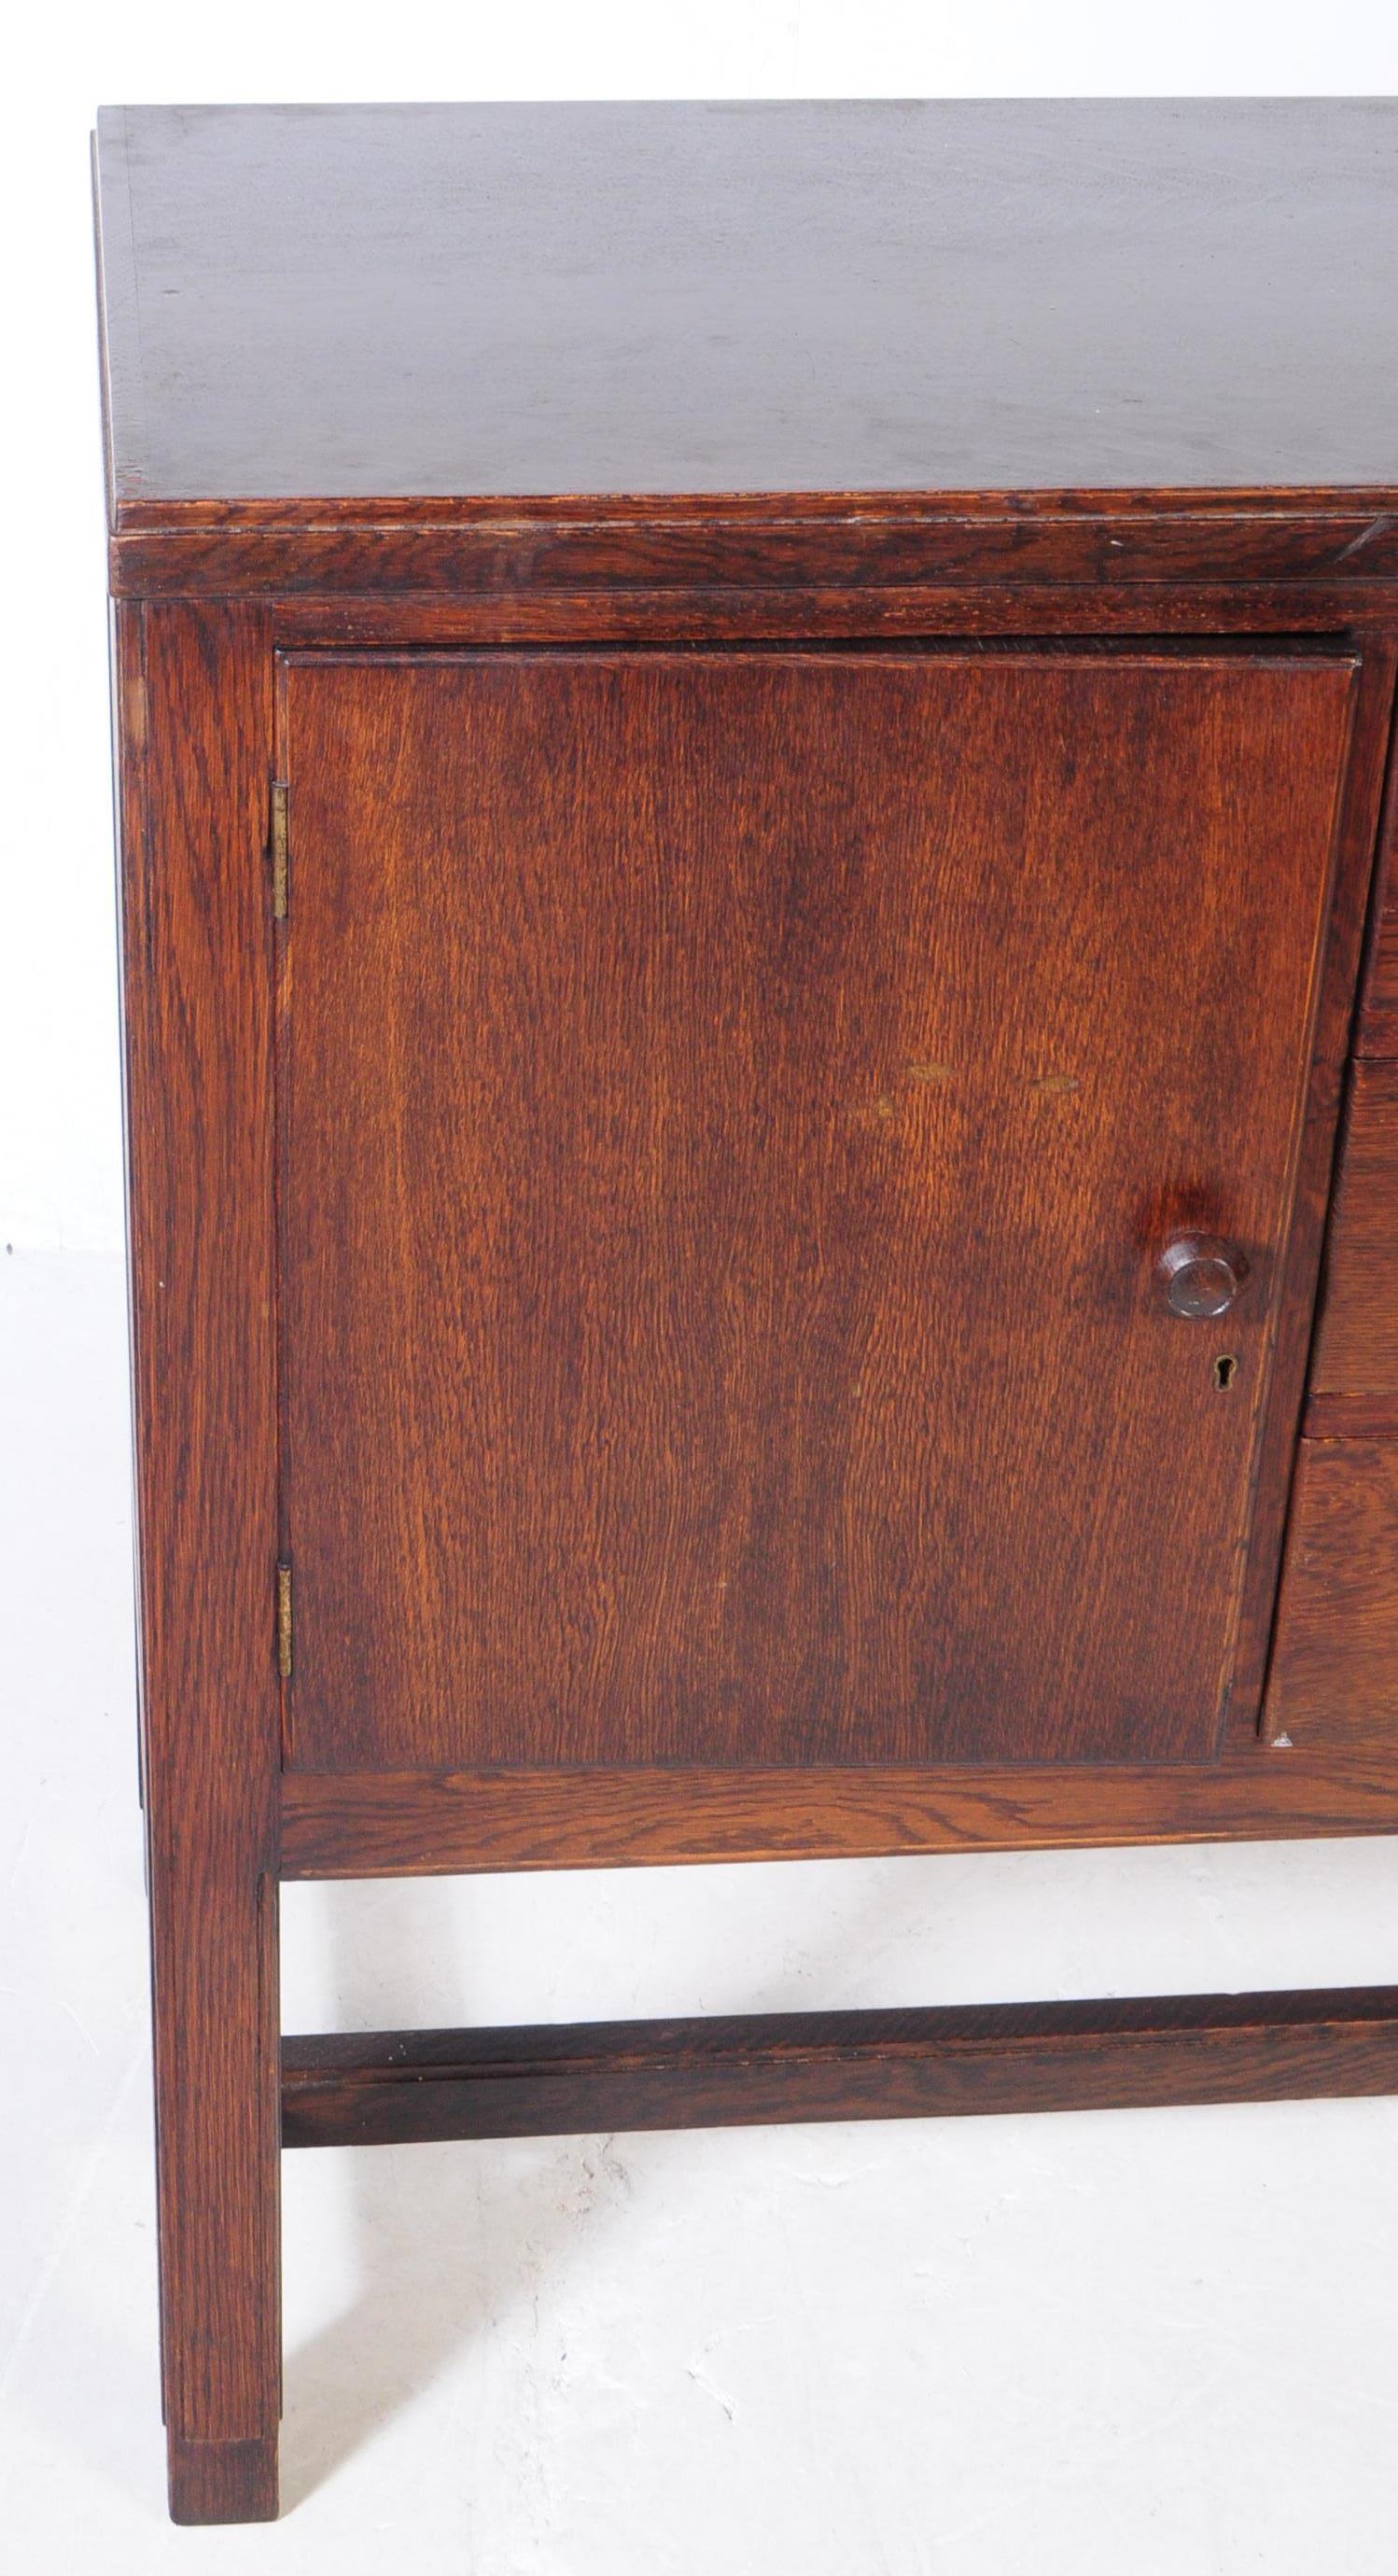 H MORRIS - COTSWOLD - MID 20TH CENTURY OAK SIDEBOARD - Image 2 of 8